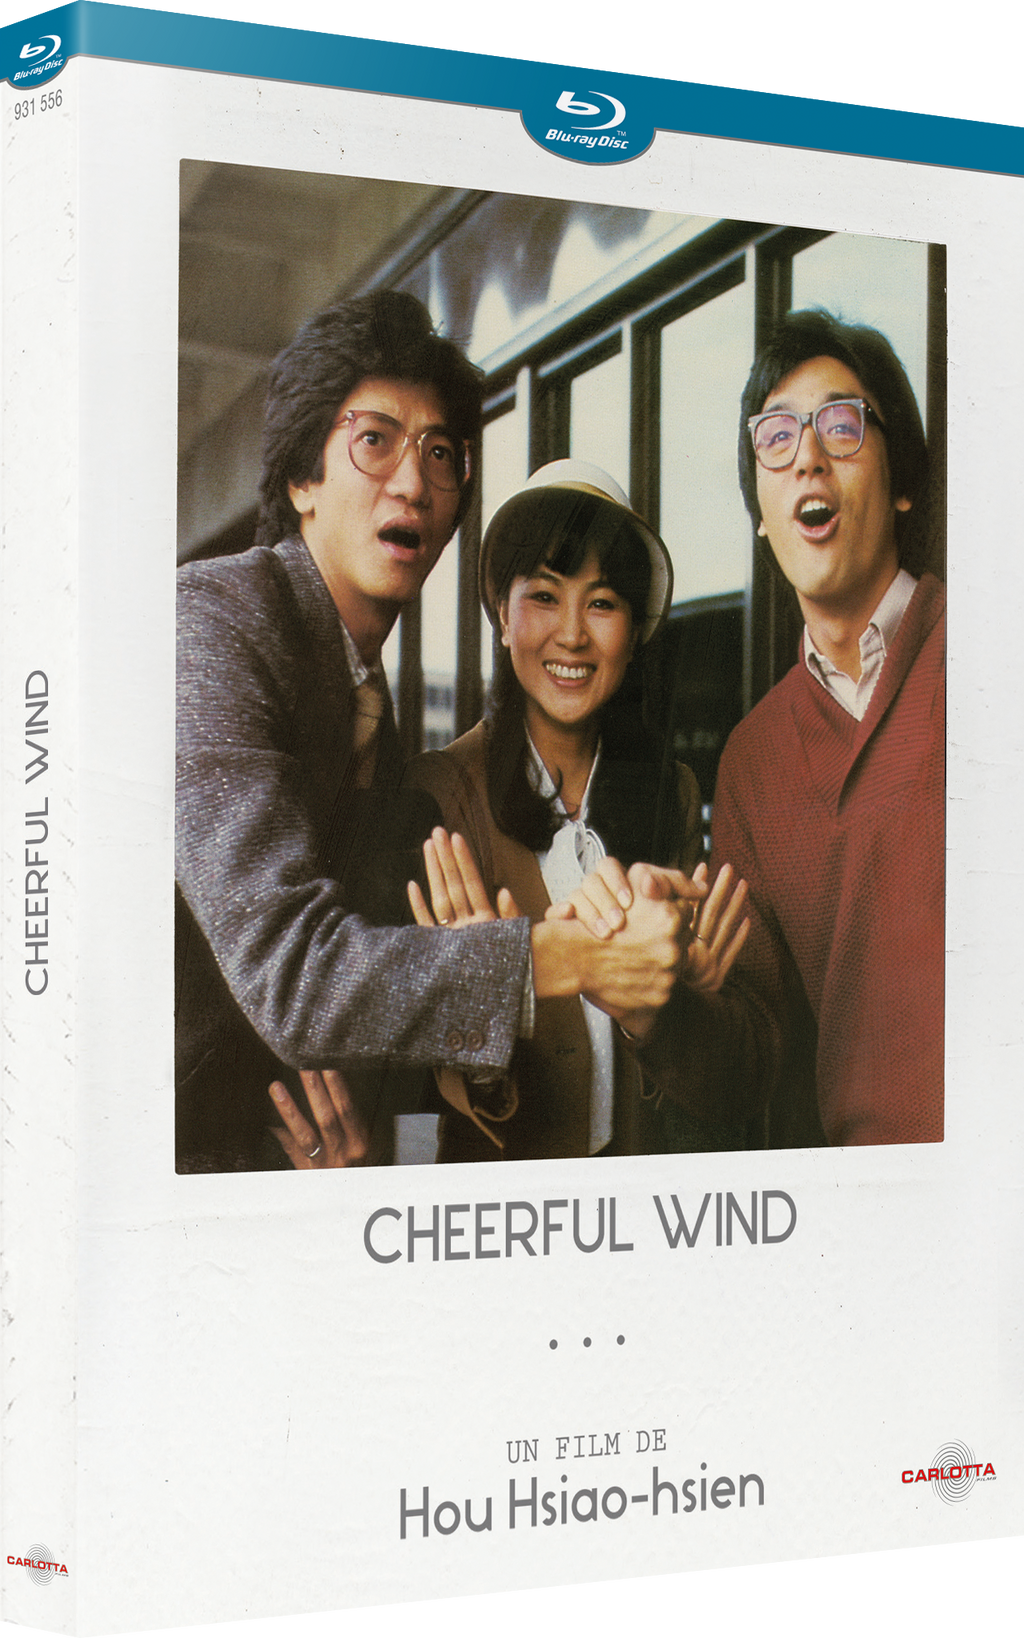 Cheerful Wind by Hou Hsiao-hsien